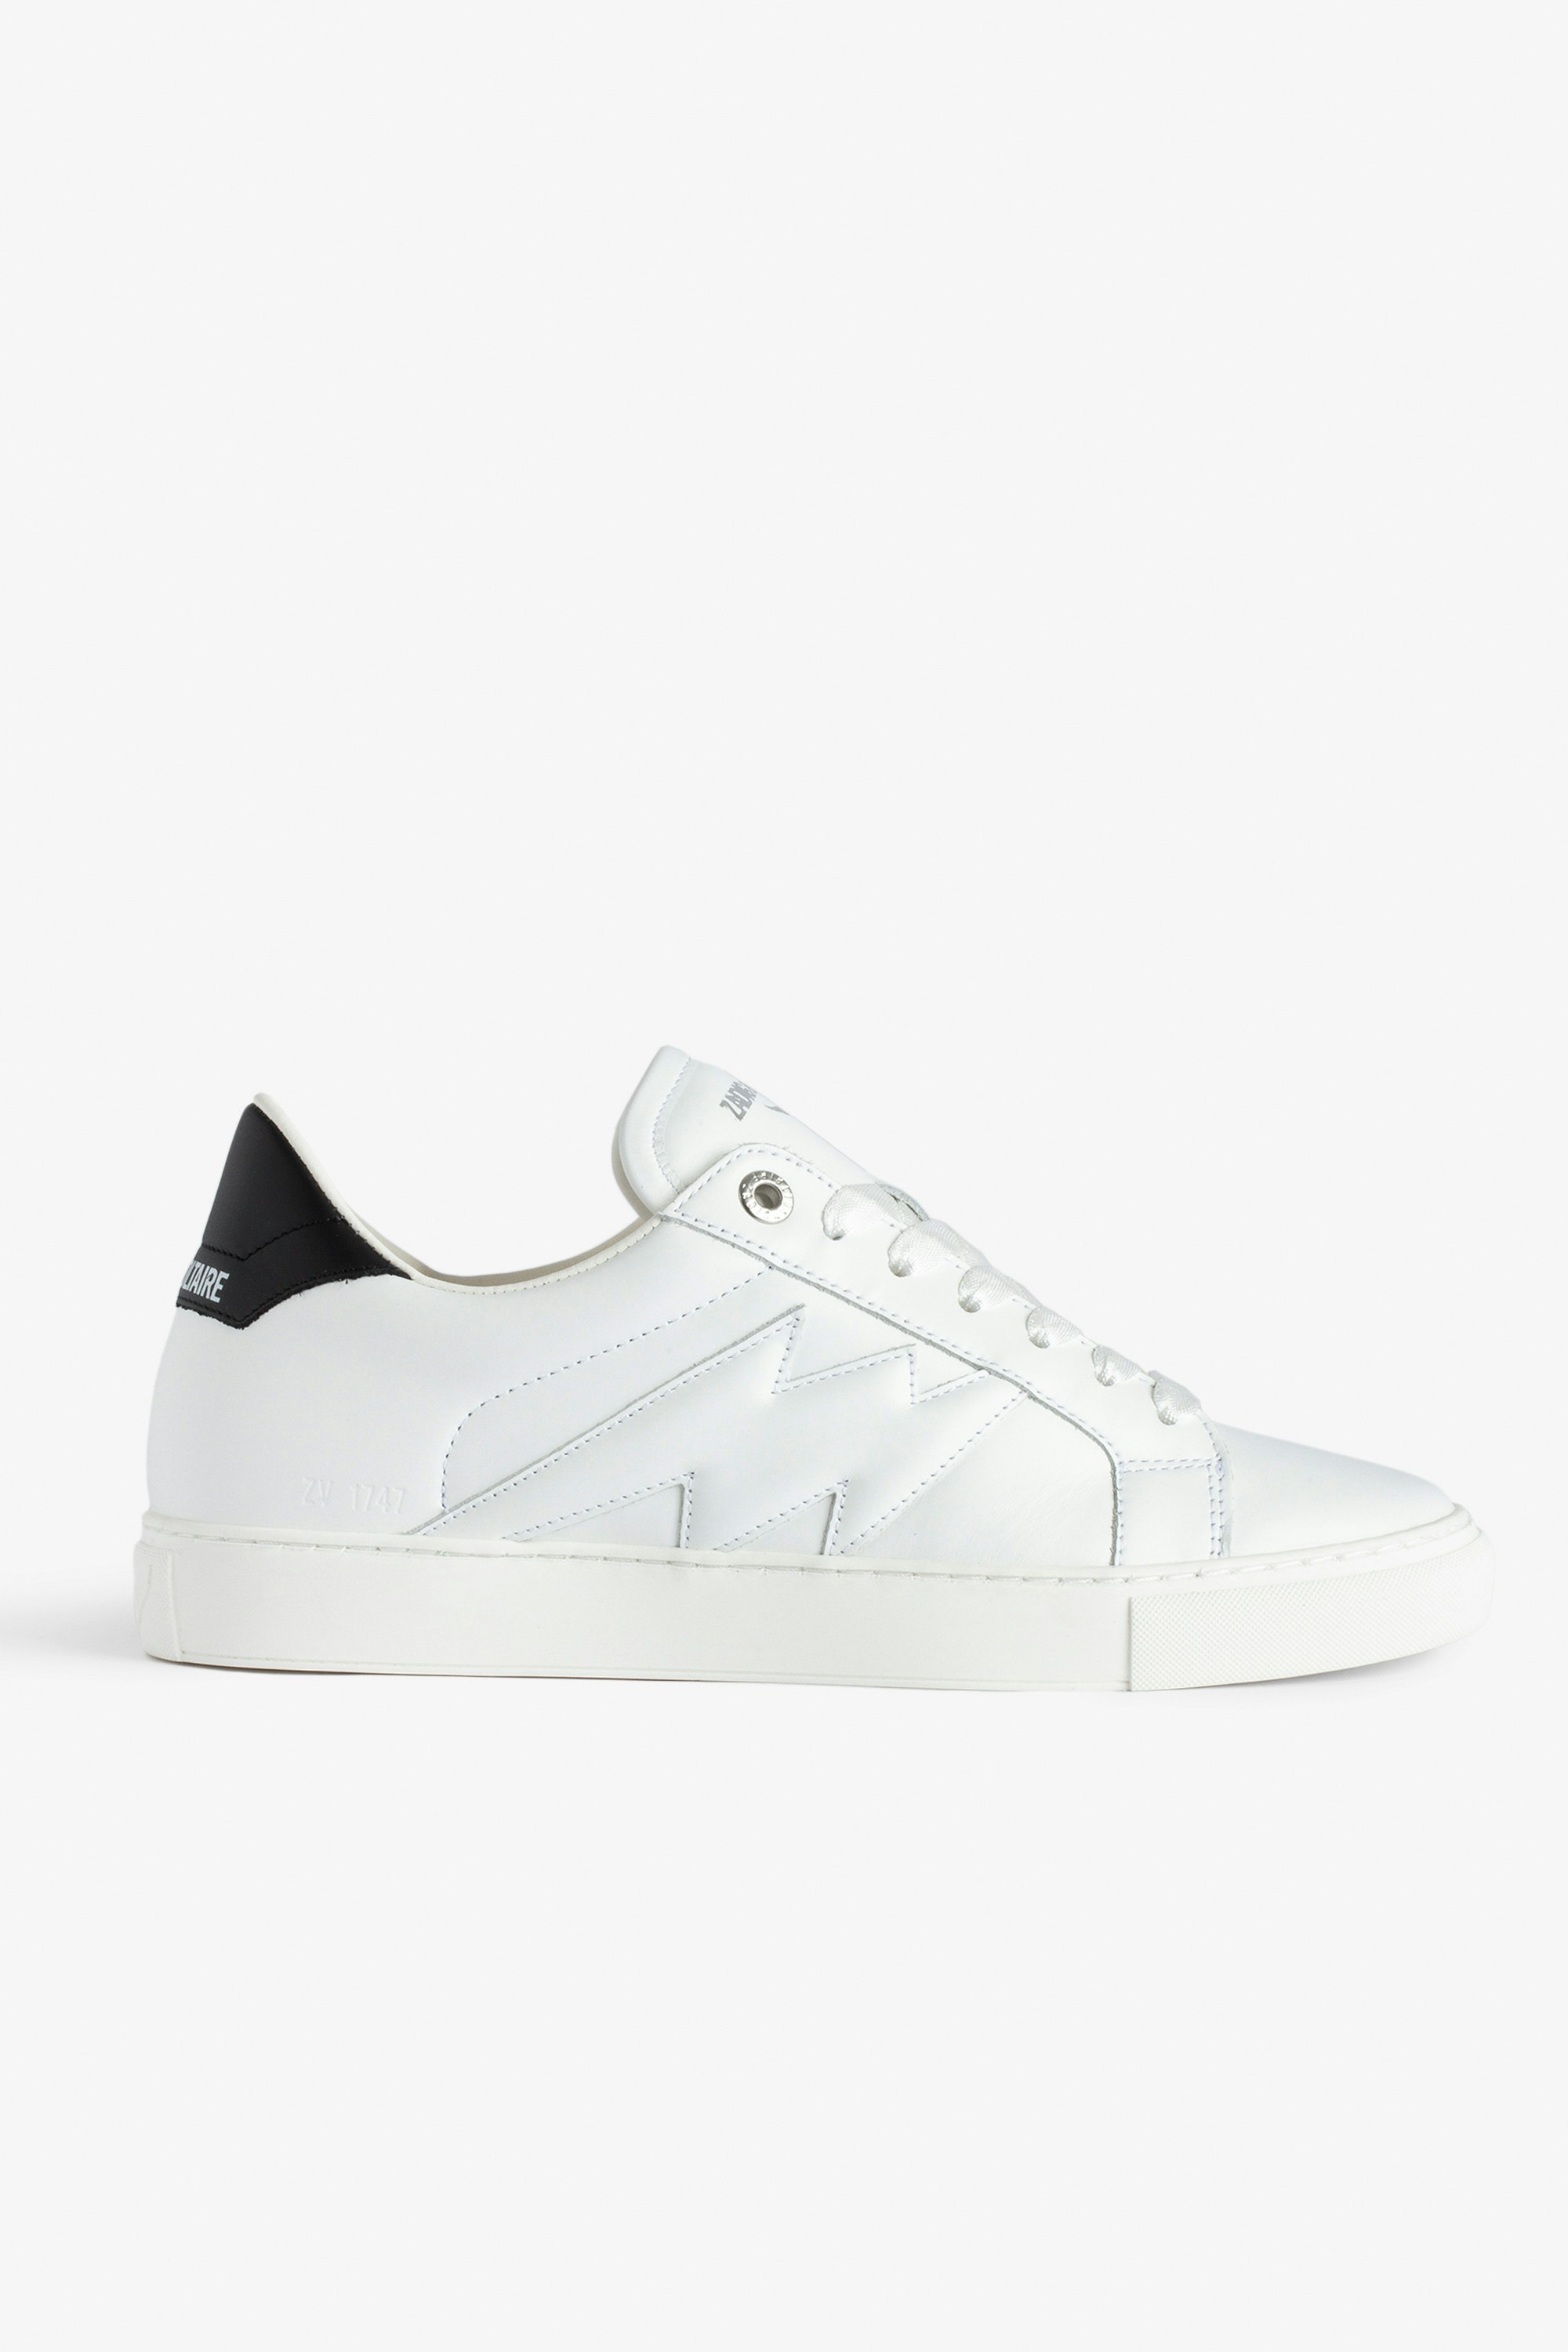 ZV1747 La Flash Low-Top Sneakers  - Women’s white smooth leather low-top sneakers with lightning bolt panels and contrasting reinforcement.